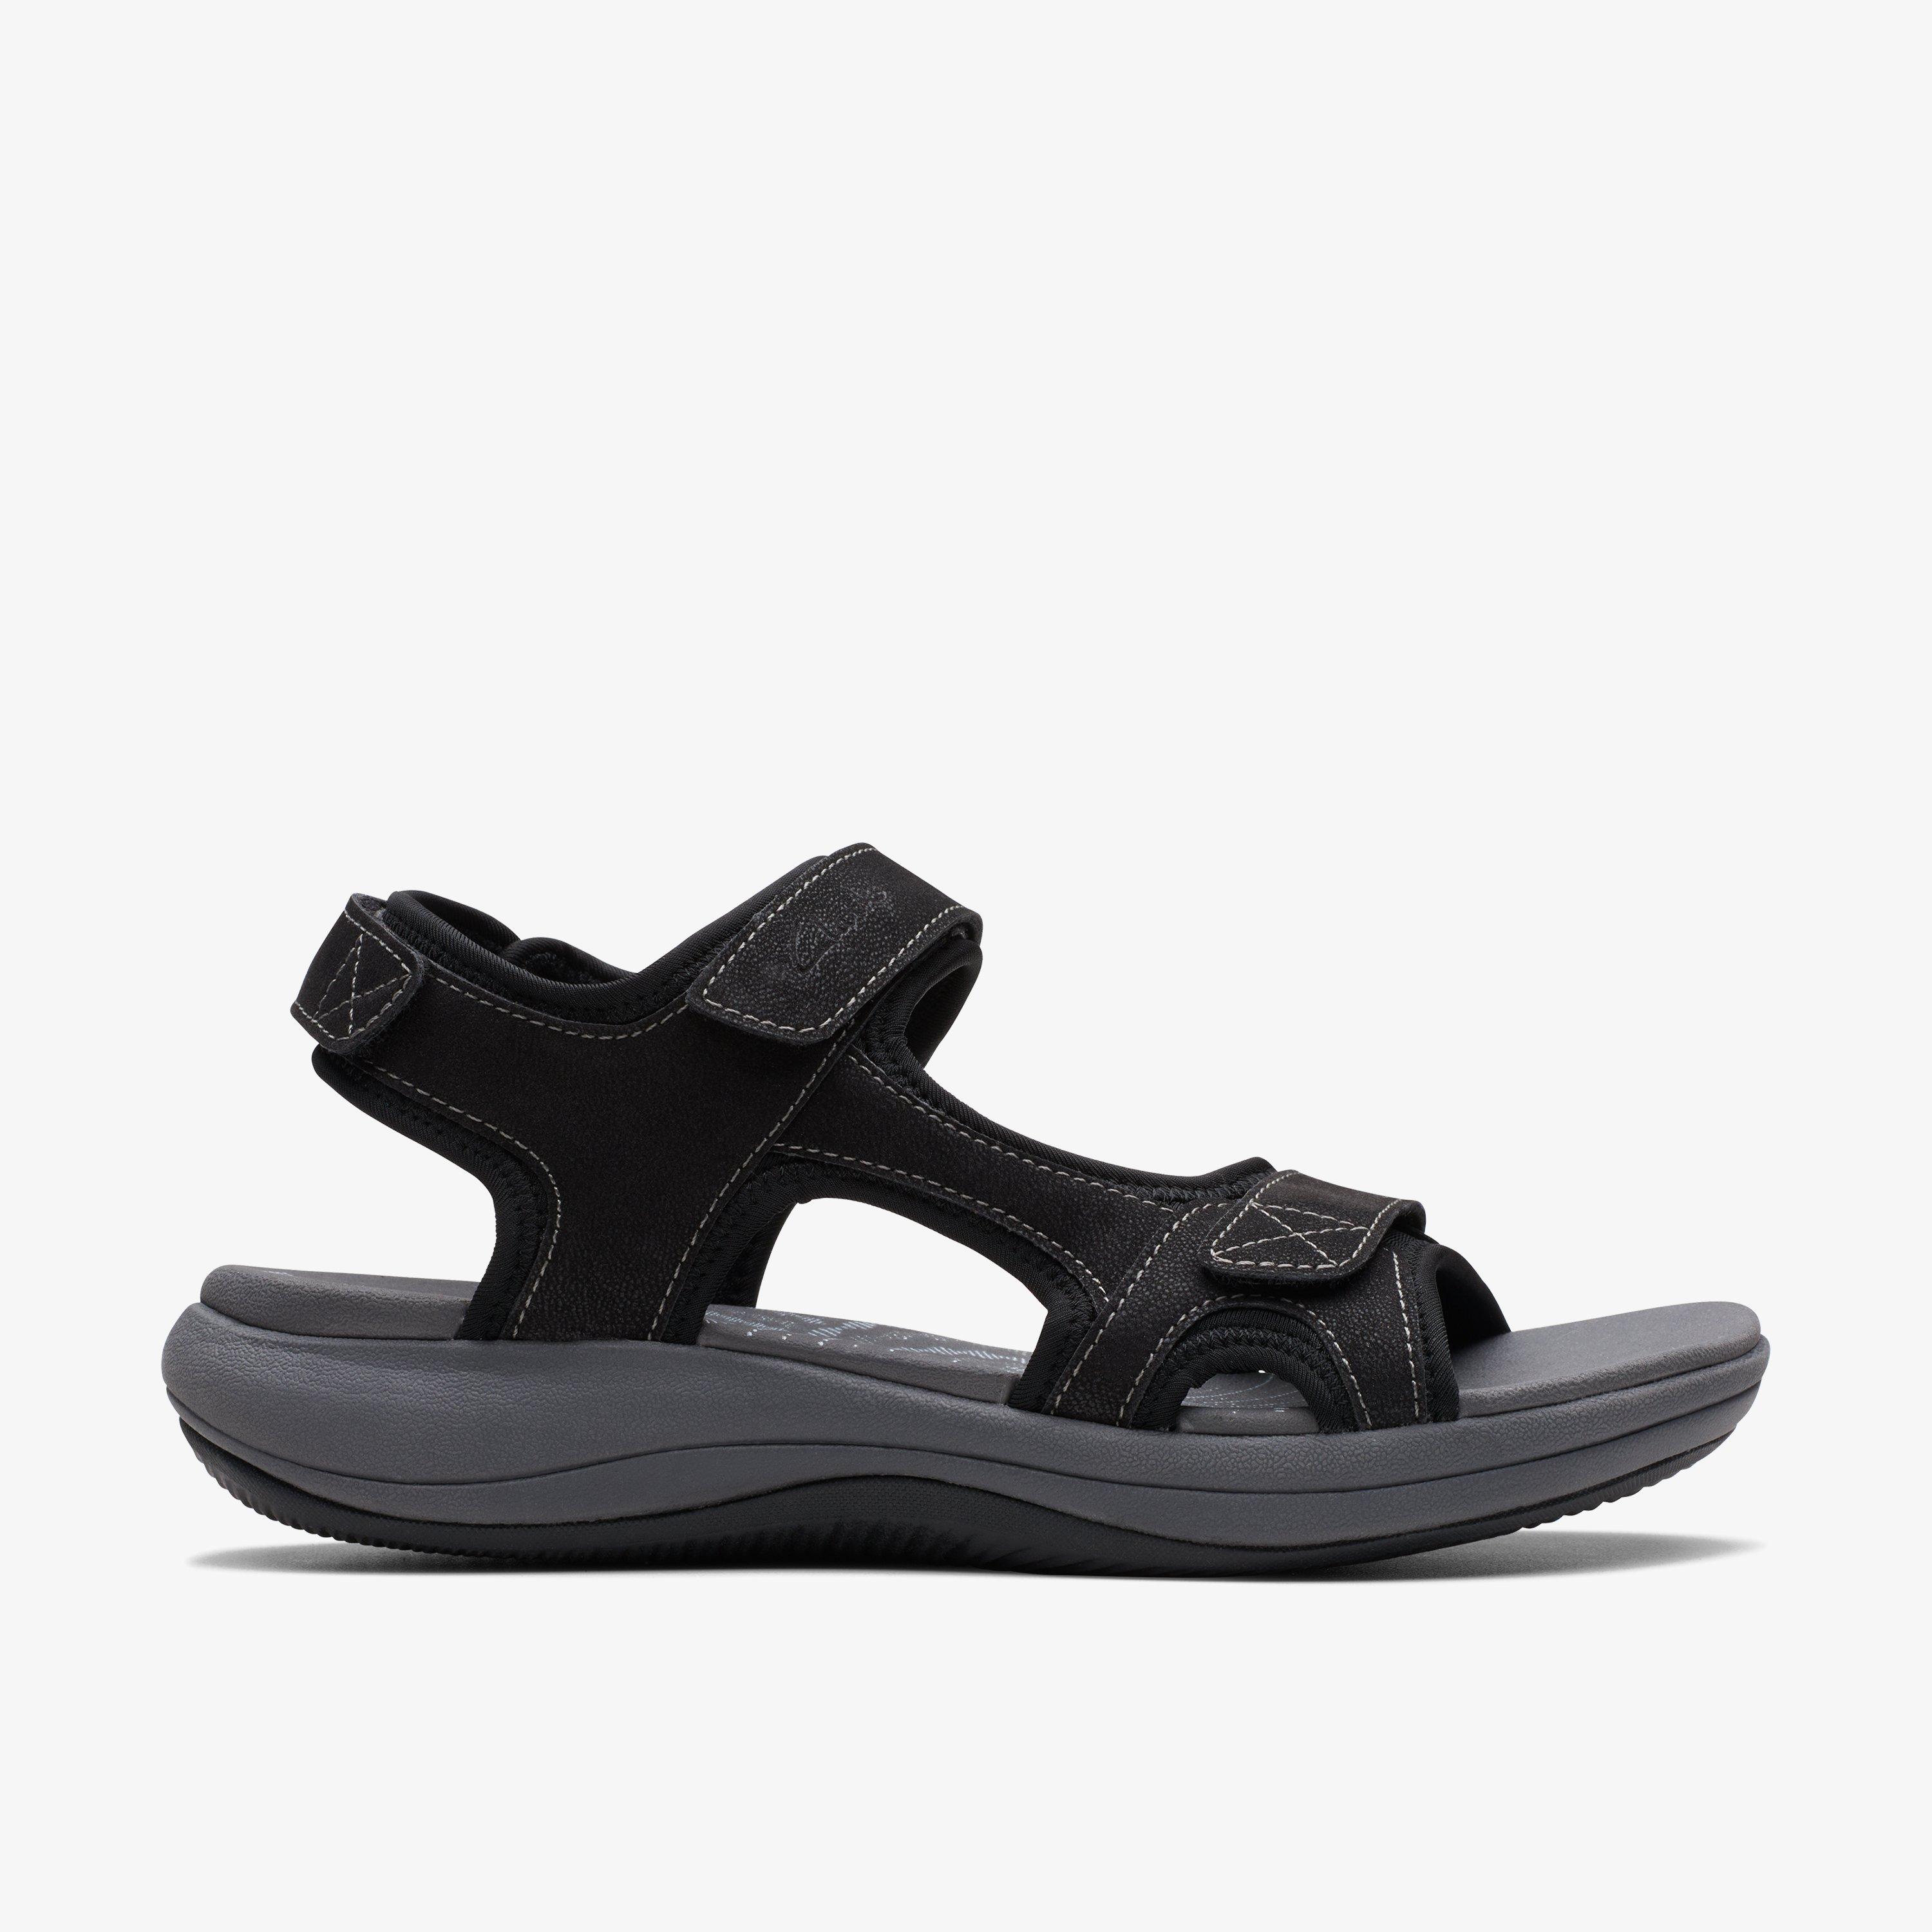 10mm Patent Leather Thong Sandals